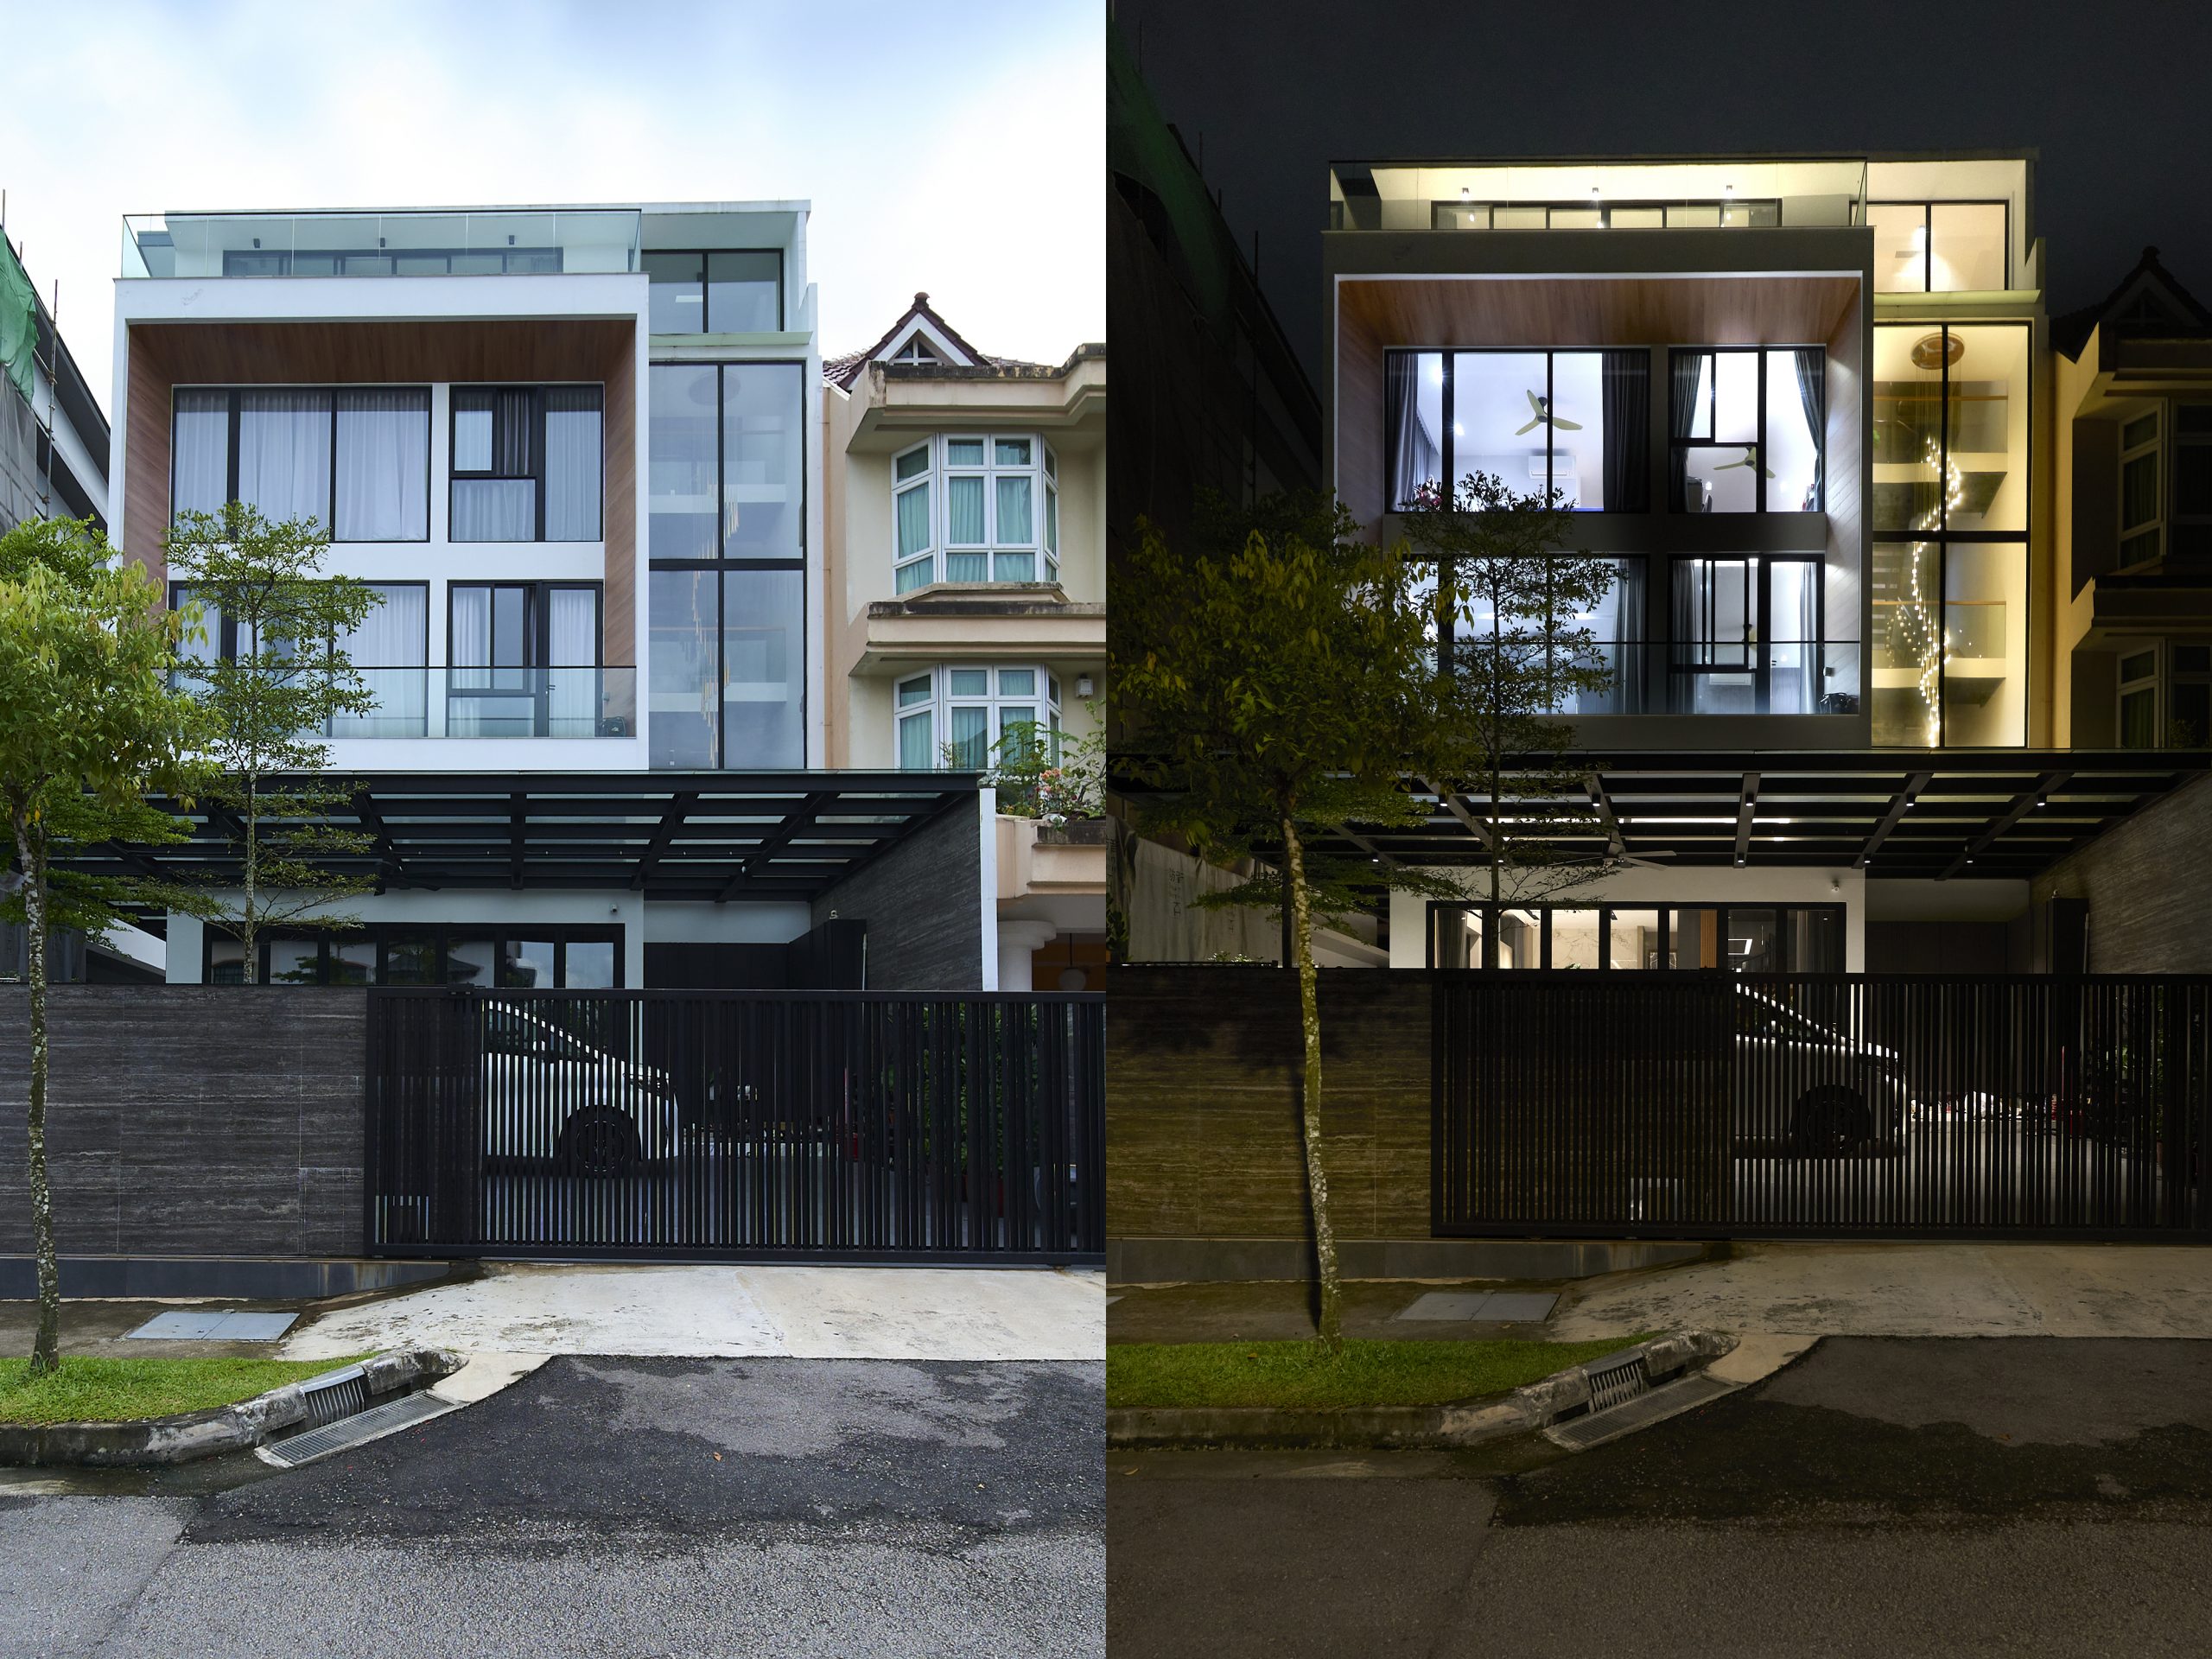 Our Boss House: Semi-Detached 3-Storey Landed Re-built House